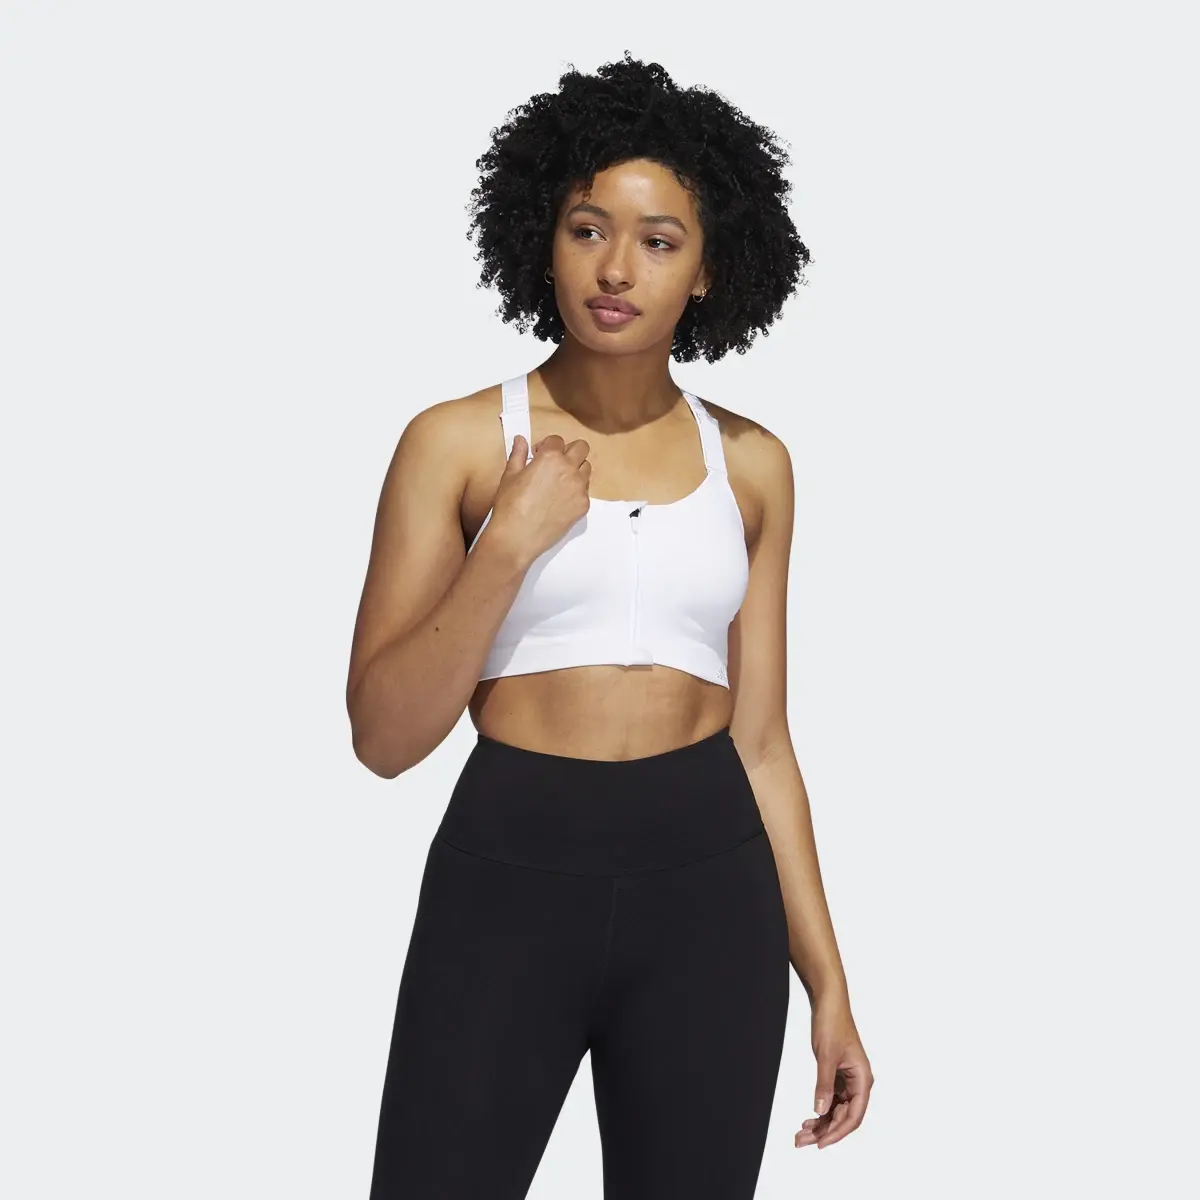 adidas, Tlrd Impact Luxe Training High Support Zip Bra, Black/White